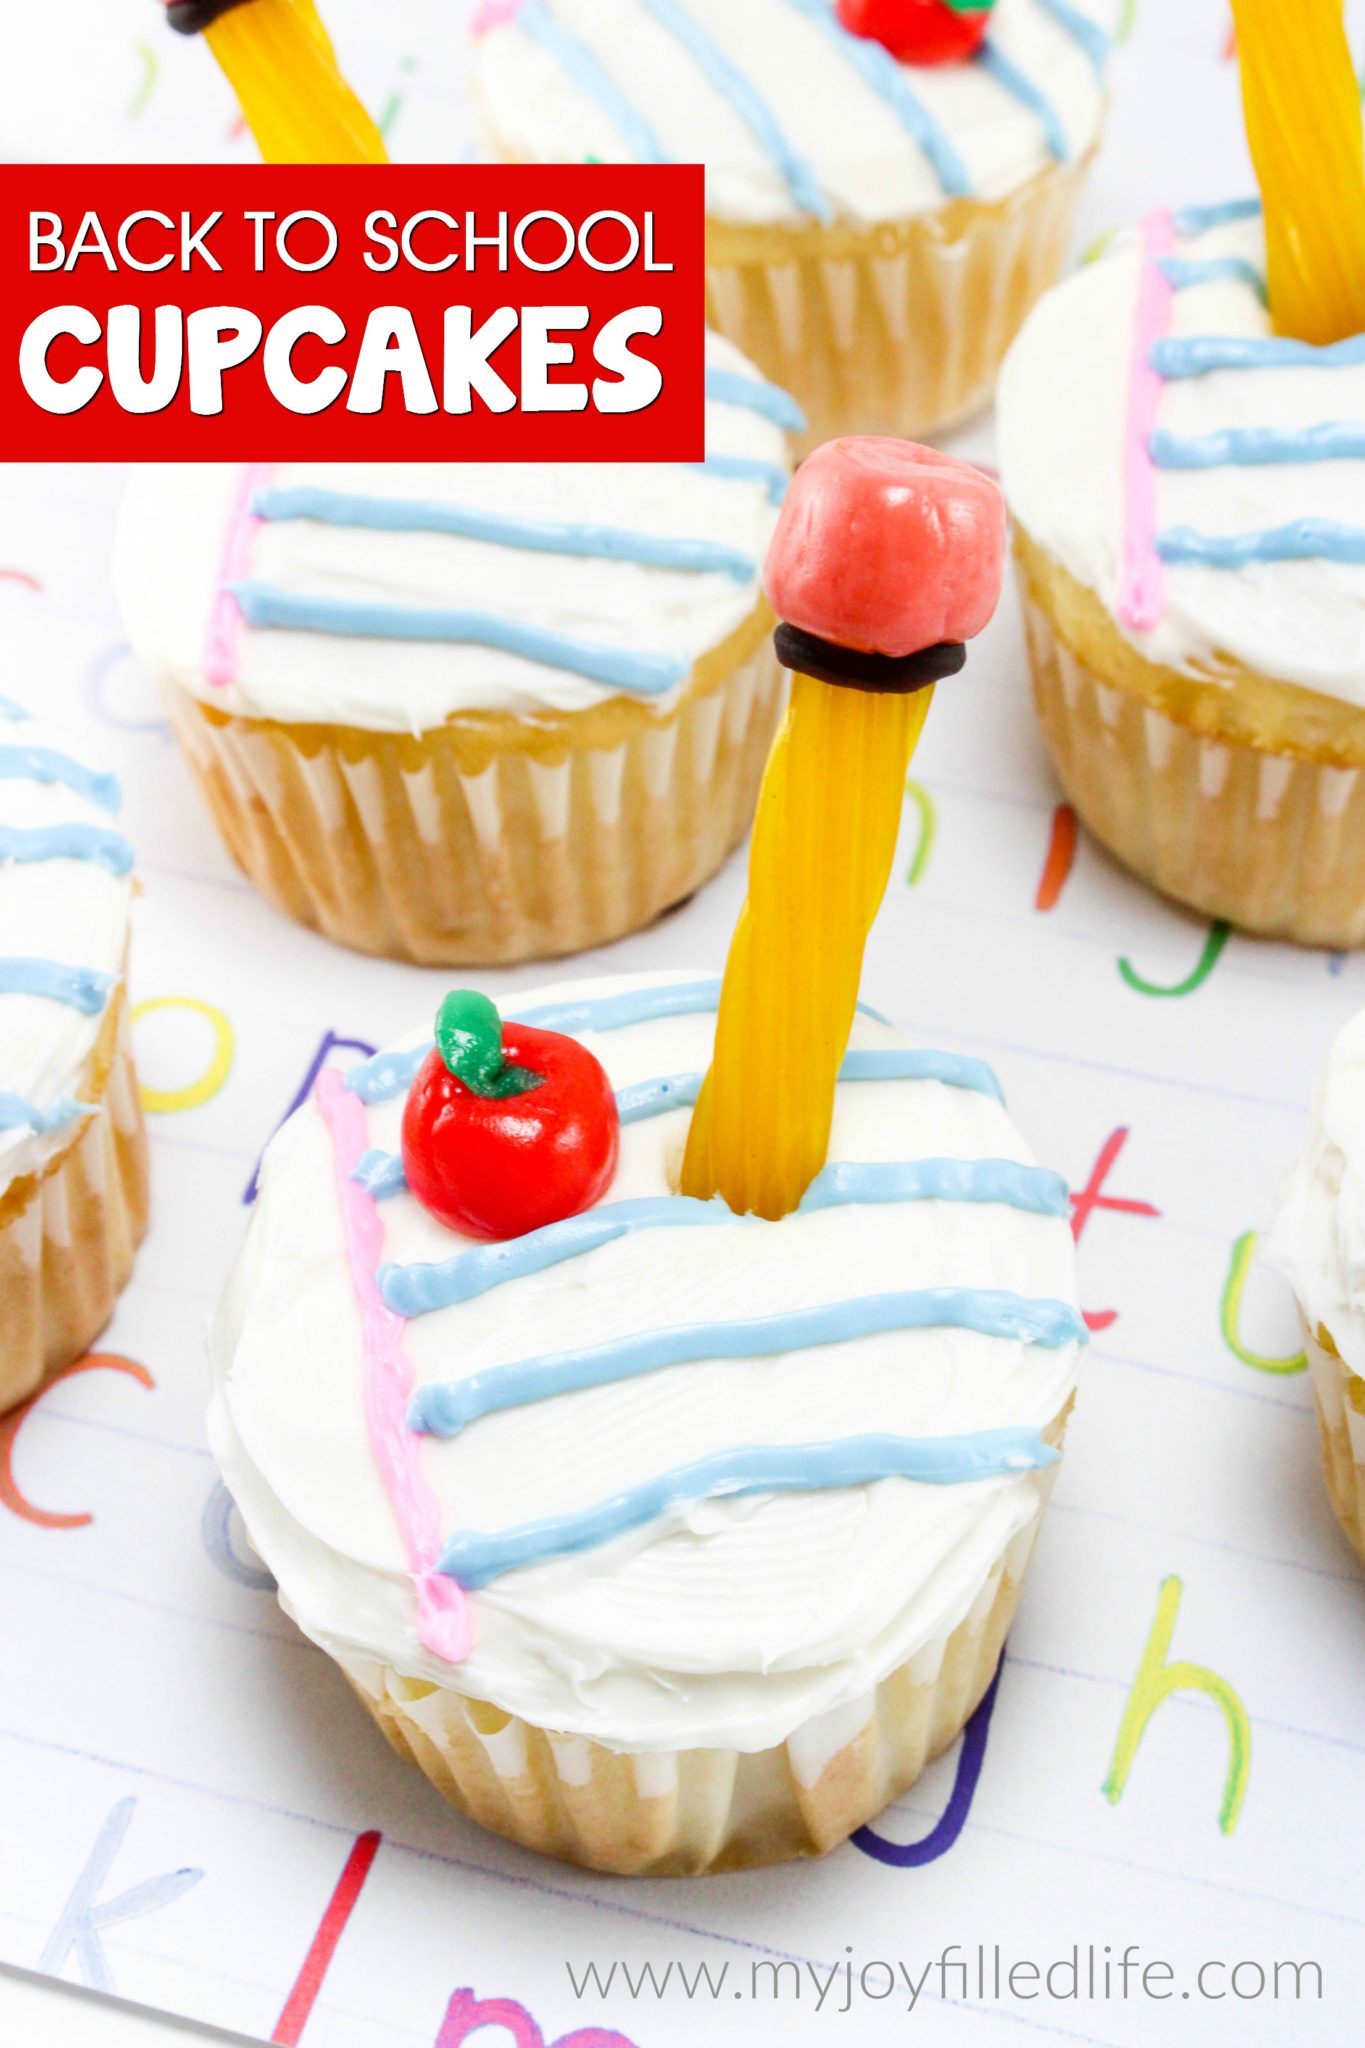 Back to School Cupcakes 